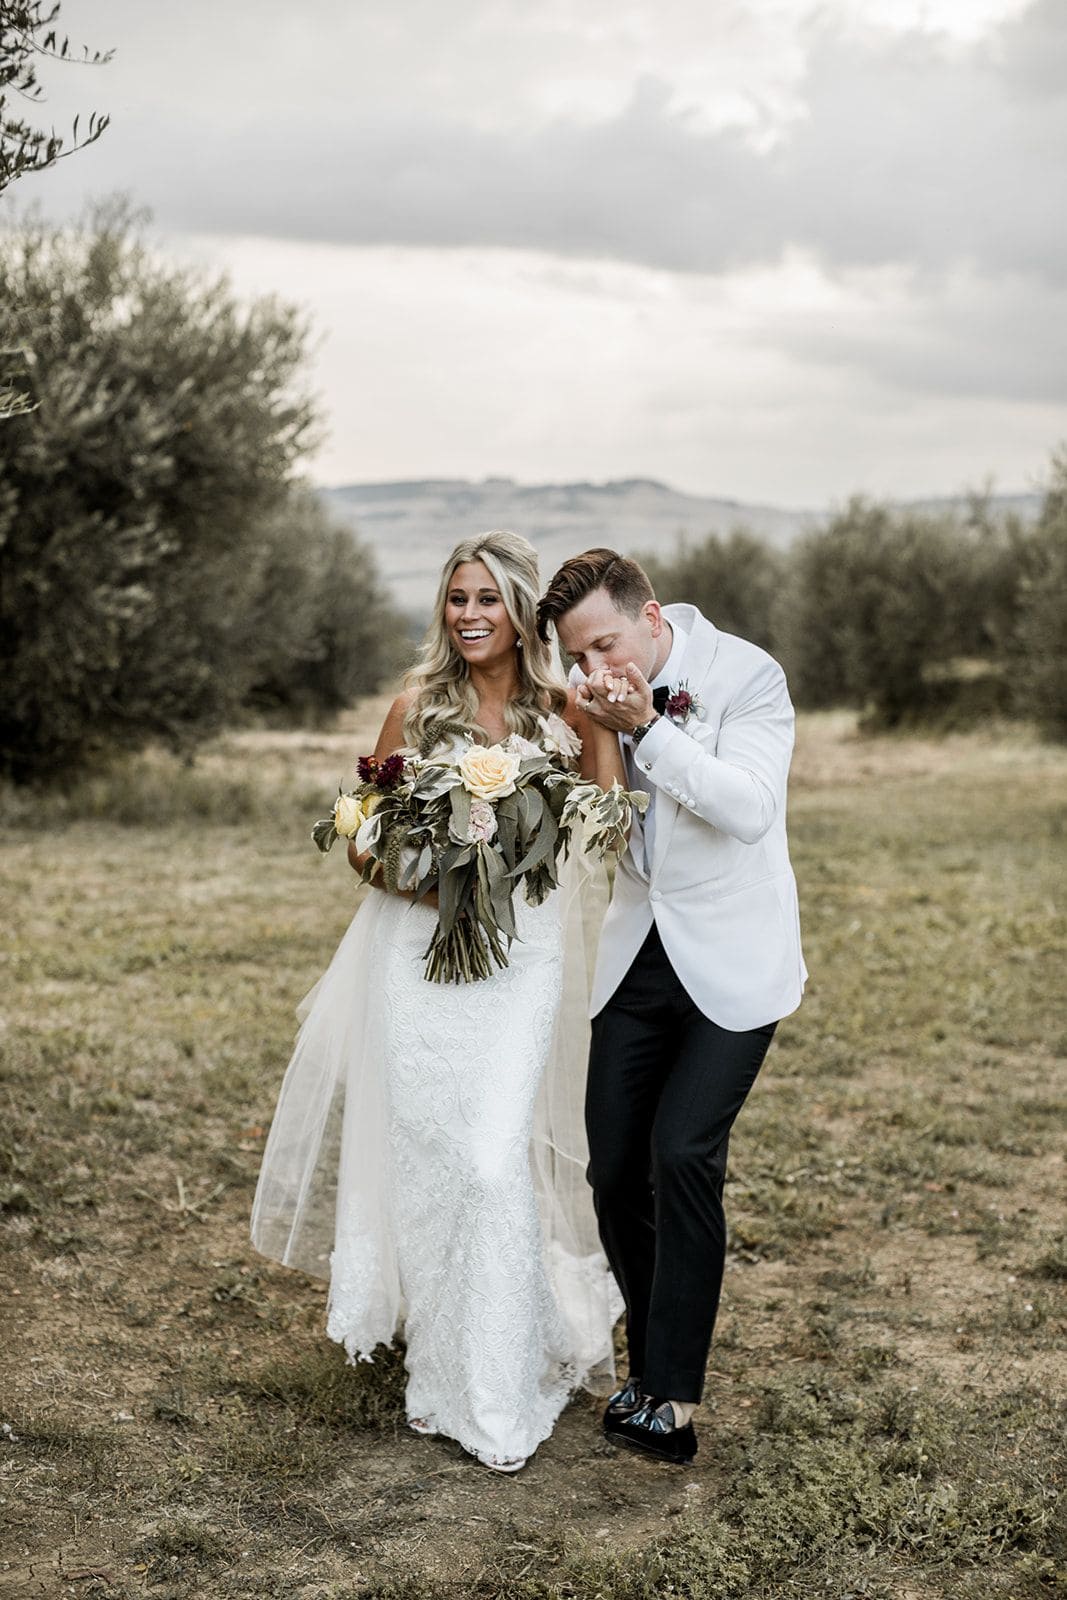 Groom kisses bride's hand during couple's portraits in Tuscany Italy